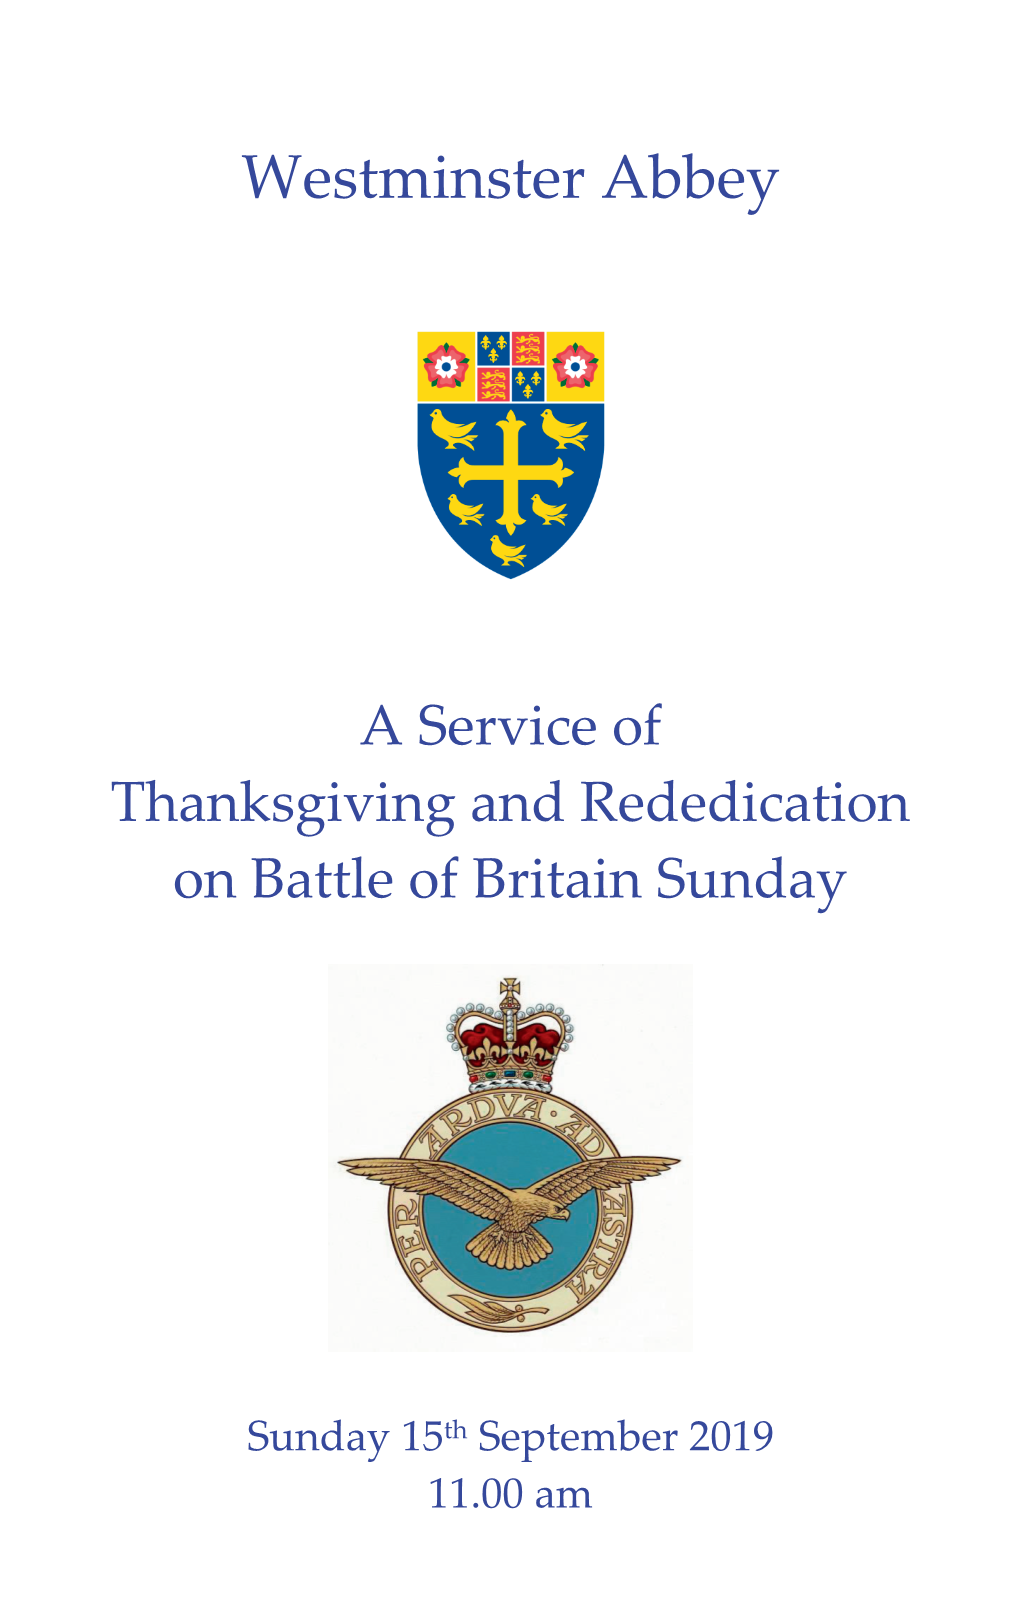 A Service of Thanksgiving and Rededication on Battle of Britain Sunday